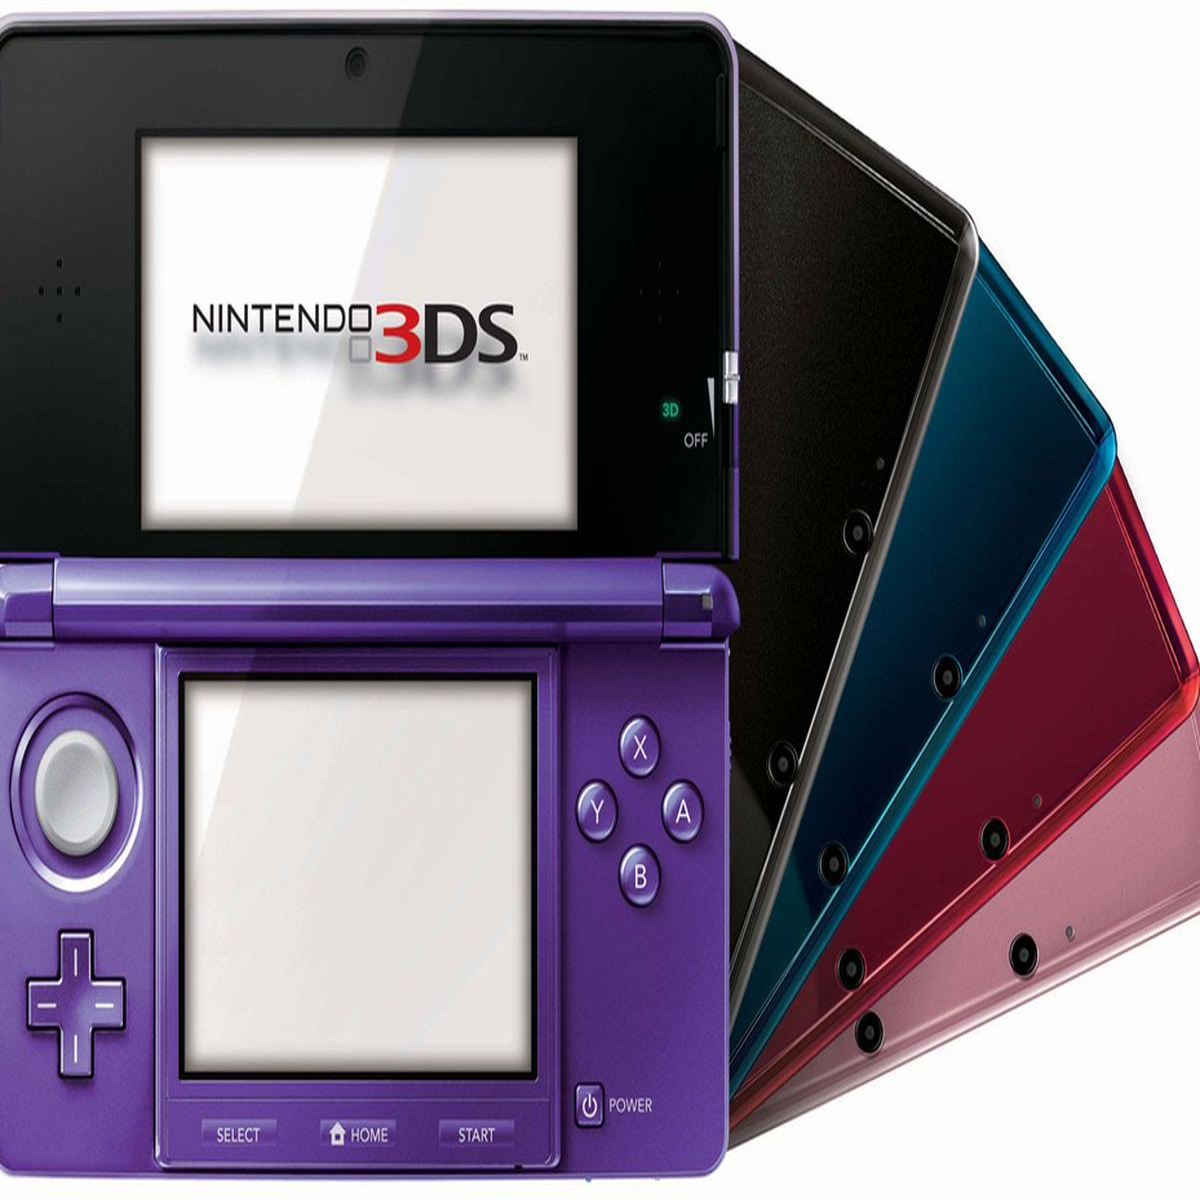 Building The World's Largest Nintendo 3DS